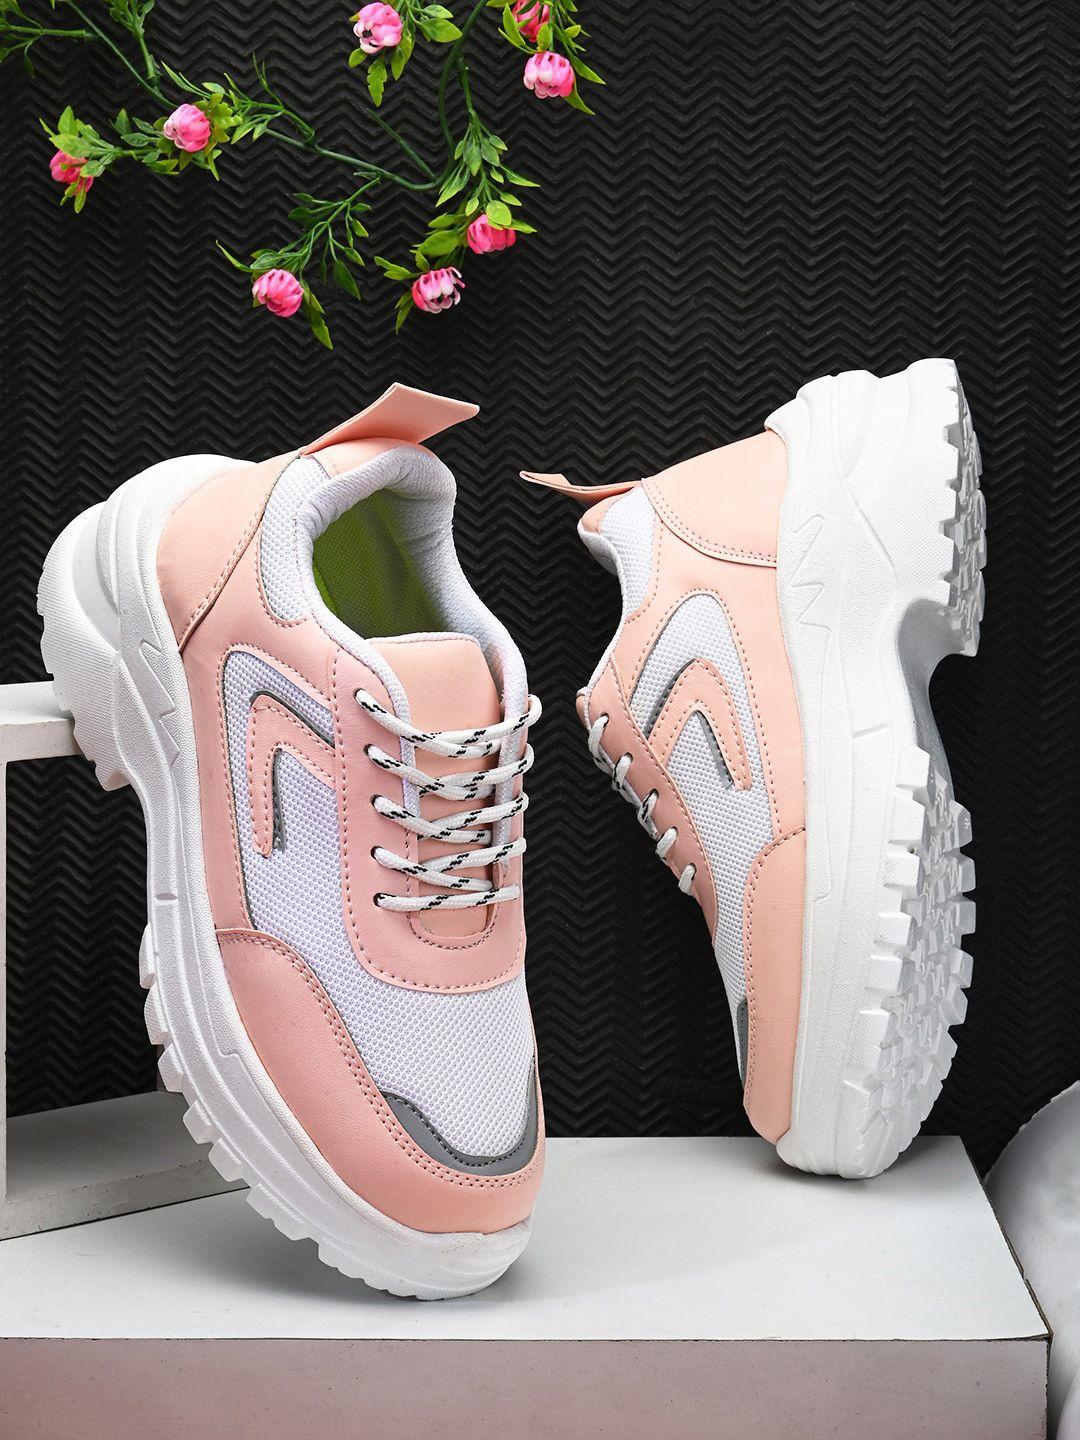 the-roadster-lifestyle-co.-women-pink-colourblocked-lightweight-sneakers